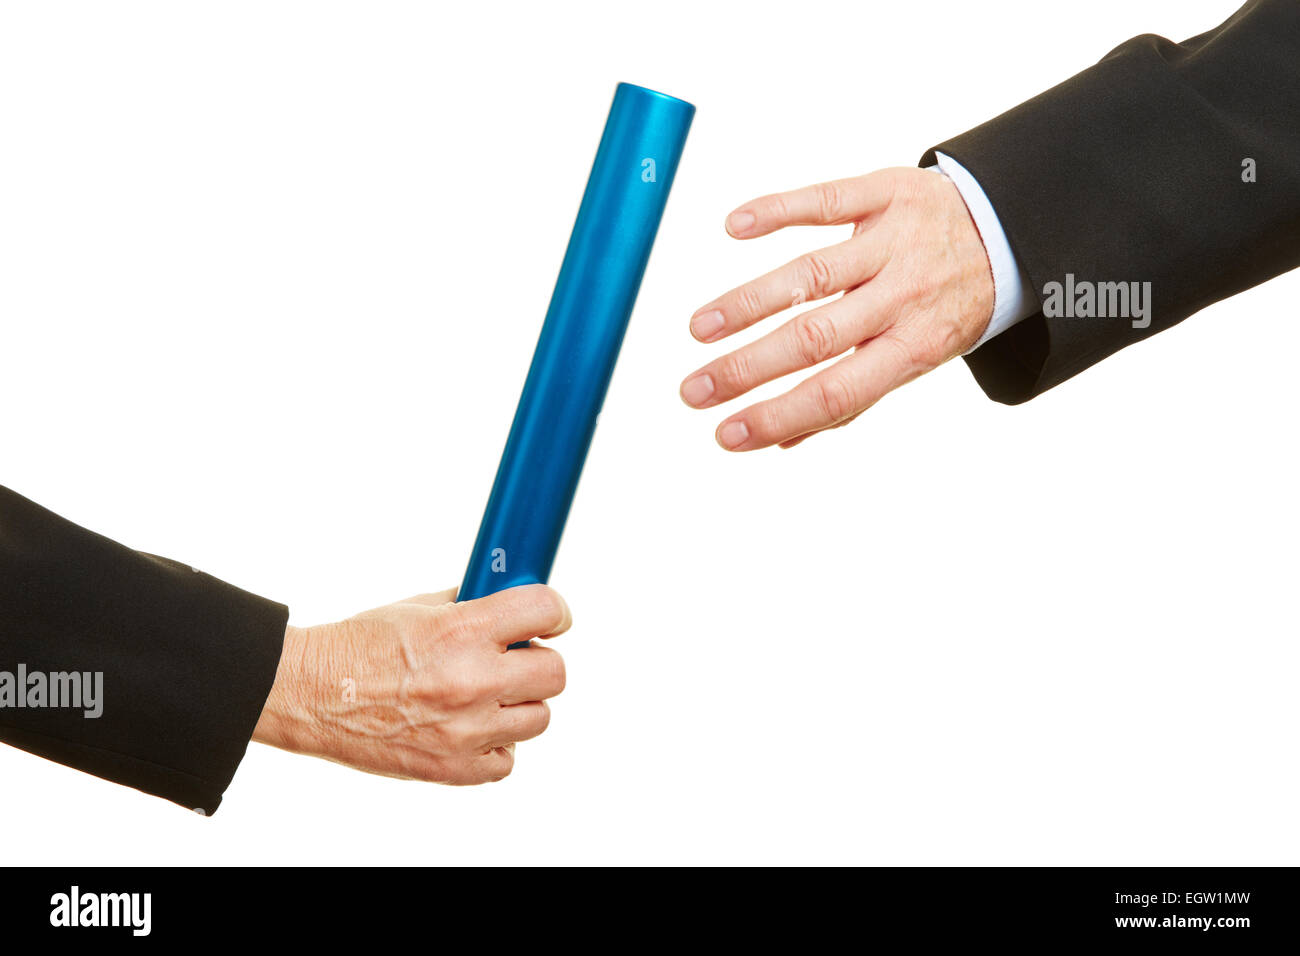 Hand offering and taking a relay baton during race Stock Photo